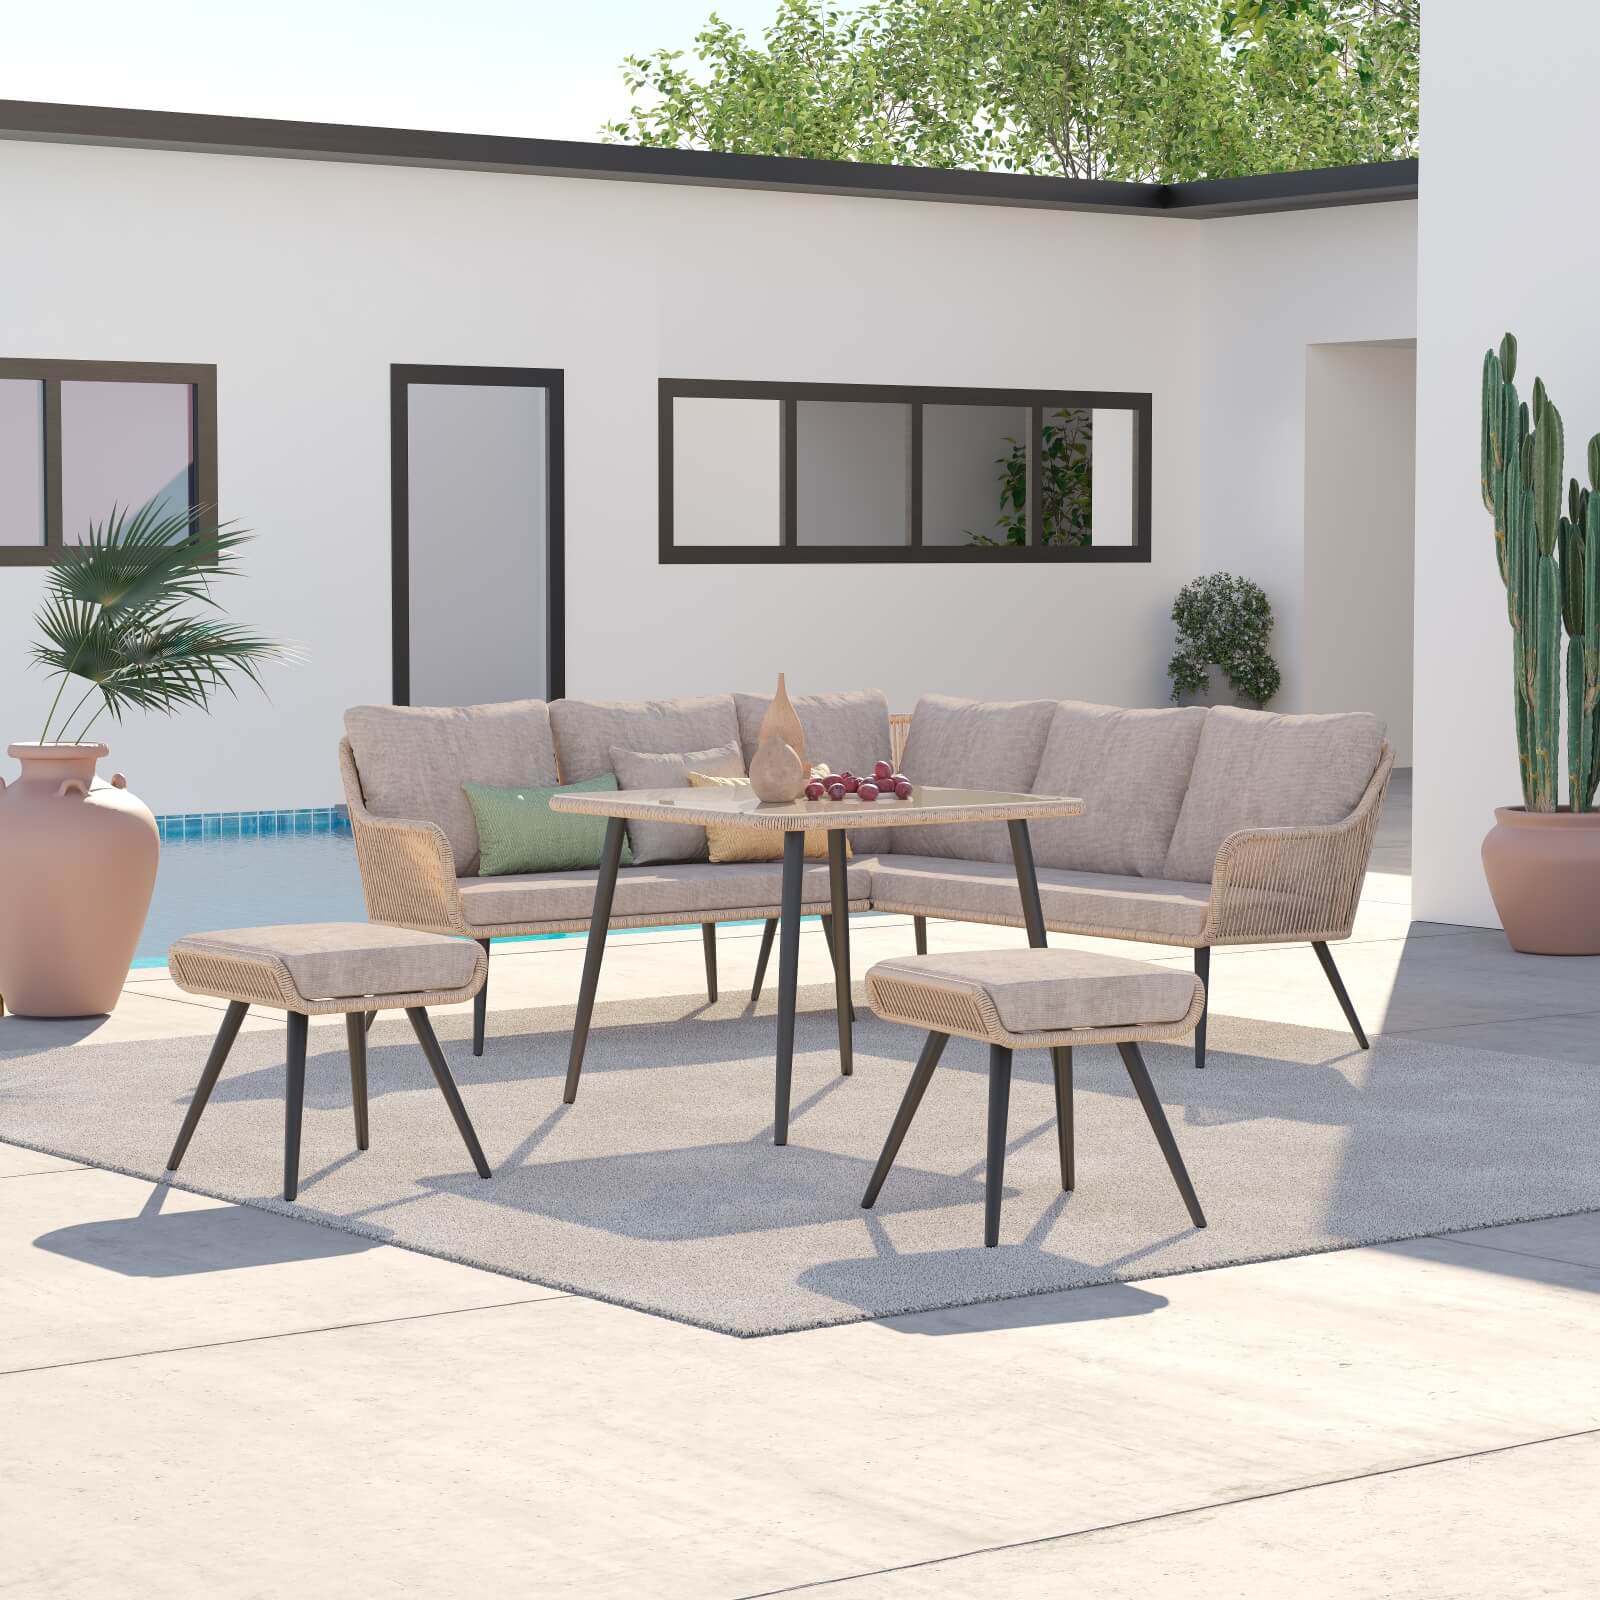 Hallerbos Modern Wicker Outdoor Furniture, L-Shaped Outdoor Sectional Dining Set with steel frame, twisted rattan design, beige cushions, 1 square dining table, 5 seats sectional sofa, 2 ottomans, in the backyard - Jardina Furniture#Color_Natural